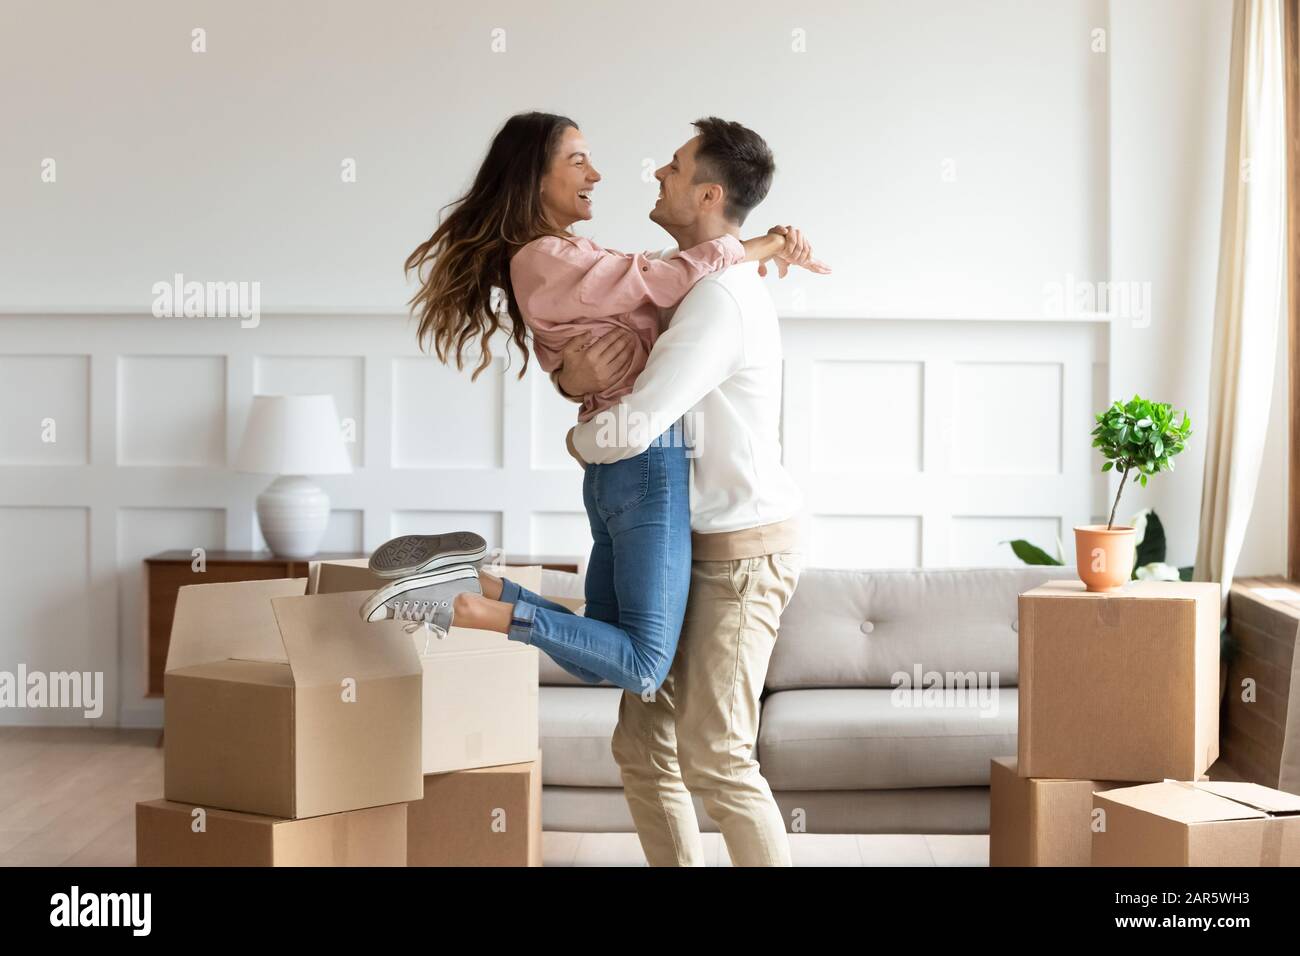 Overjoyed couple dancing excite to move in together Stock Photo